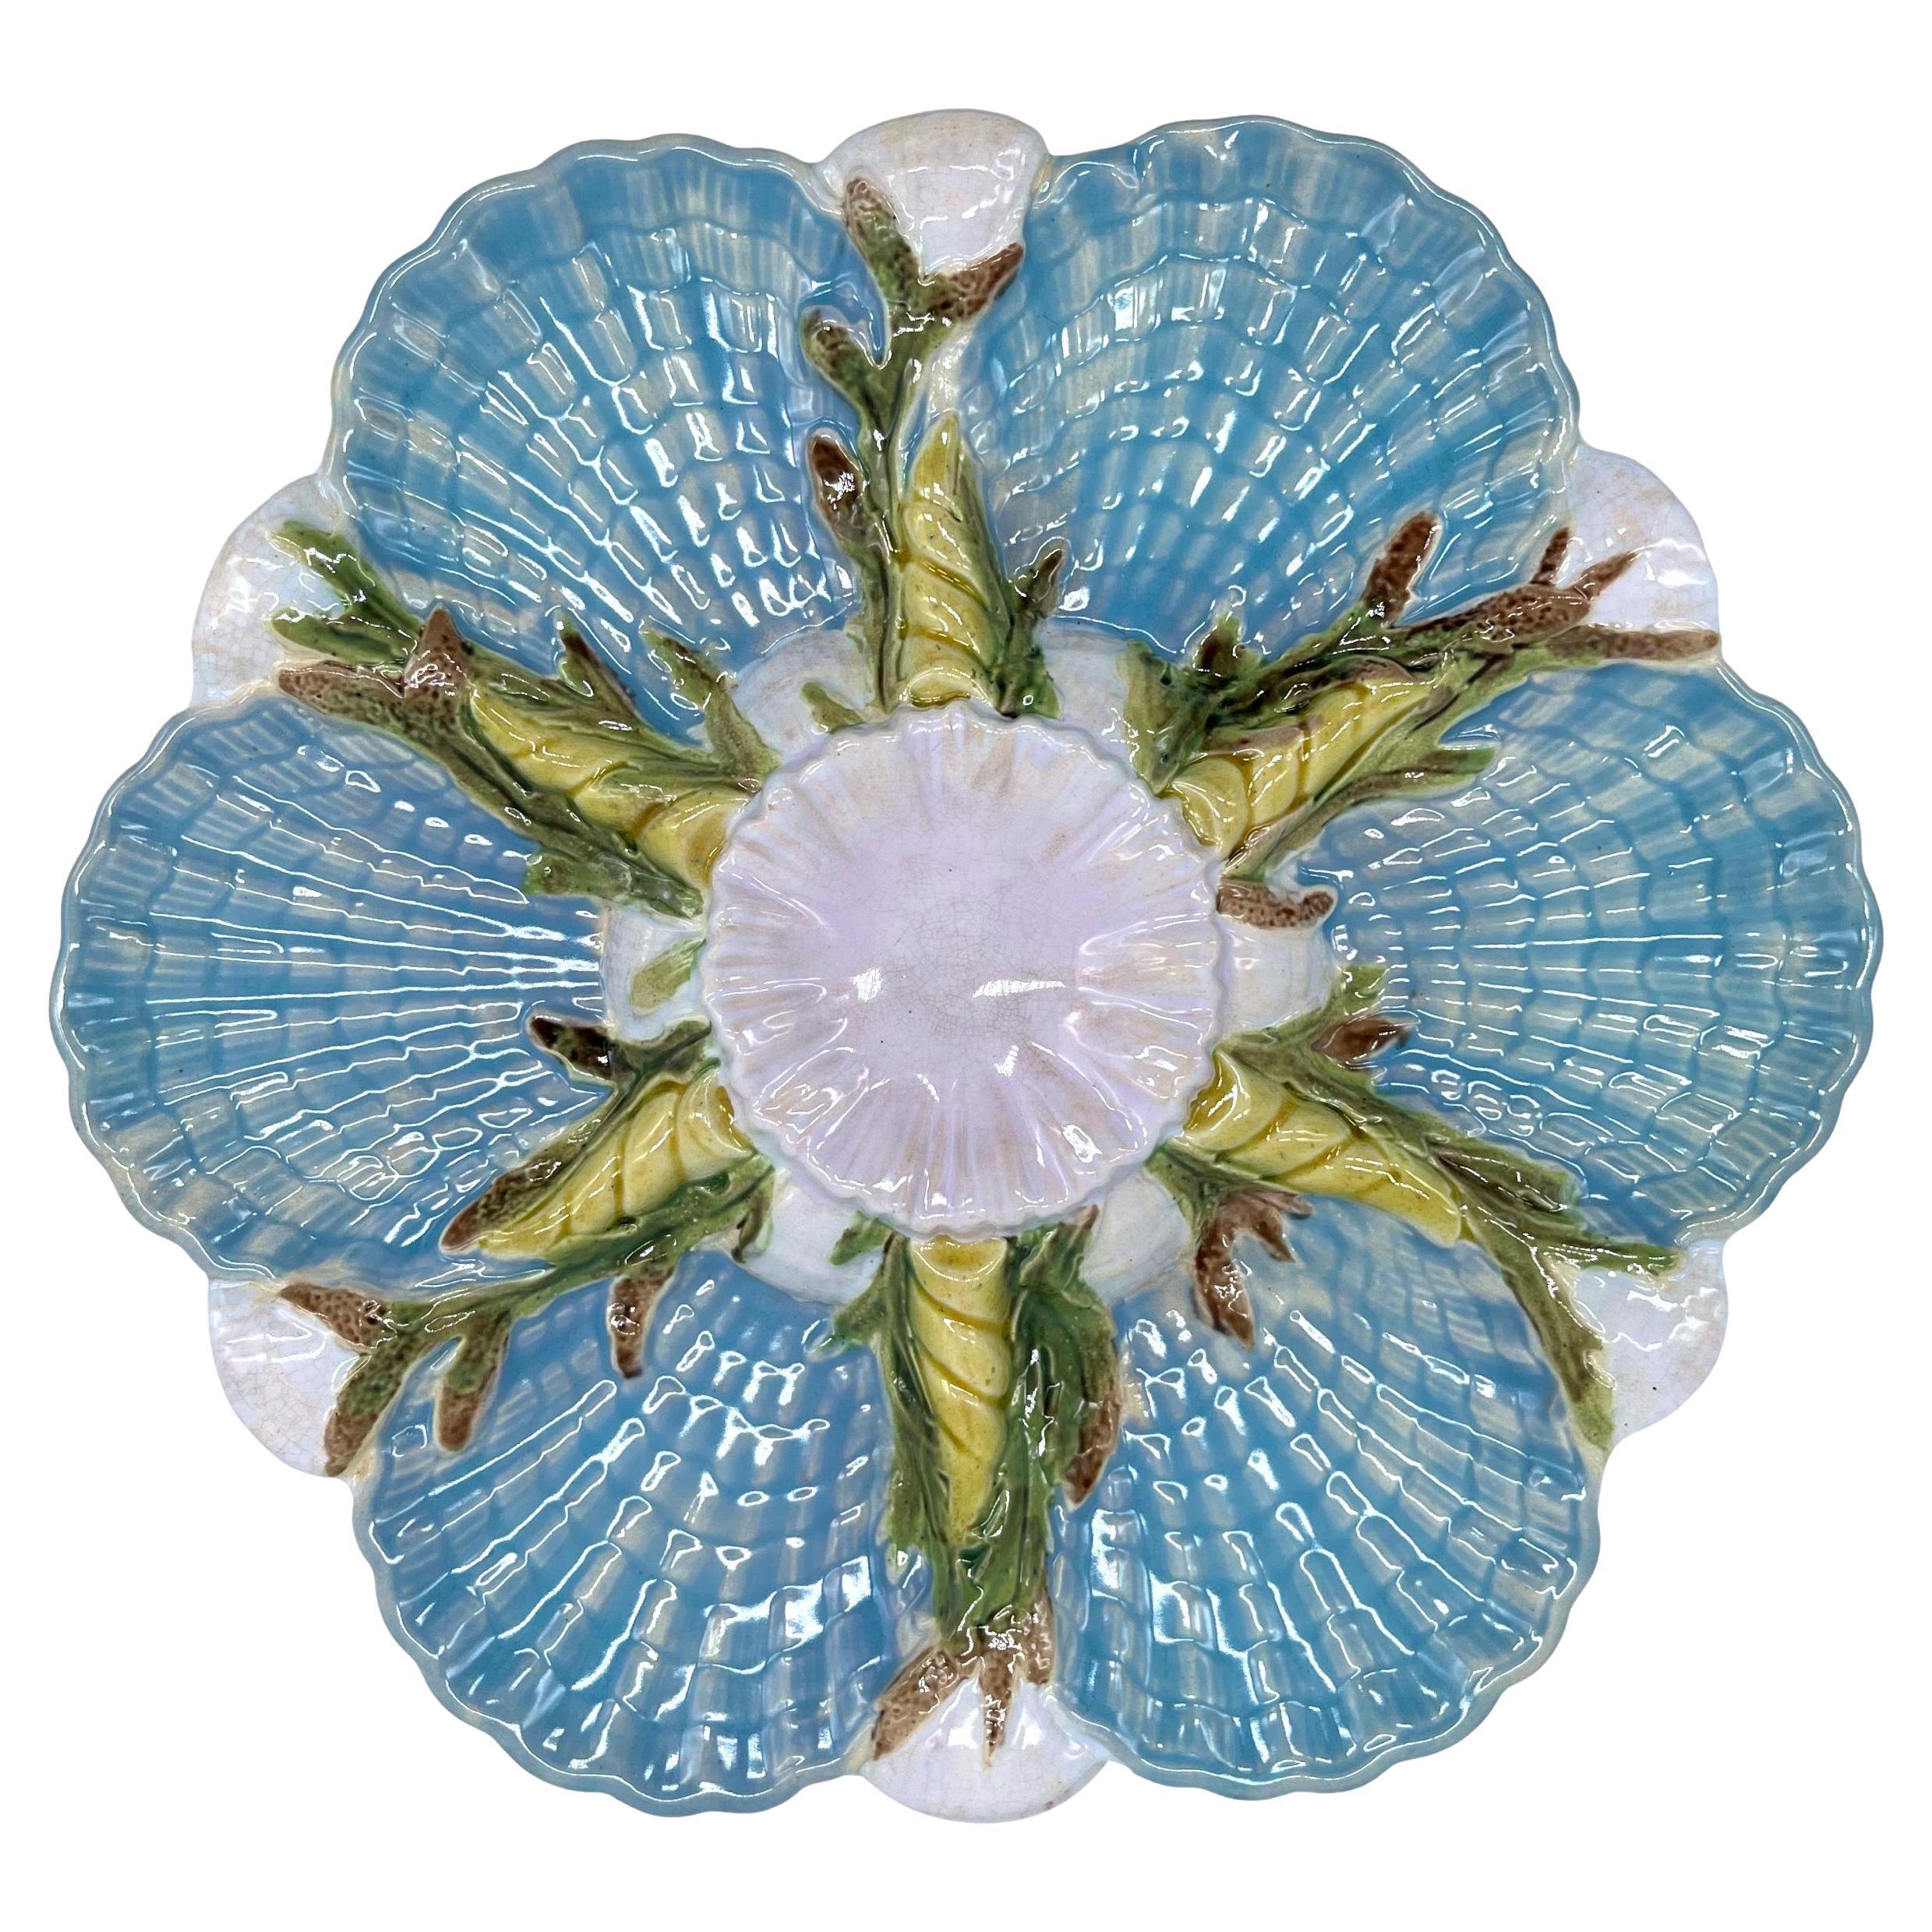 George Jones Majolica Scalloped Oyster Plate on Turquoise, English, ca. 1875